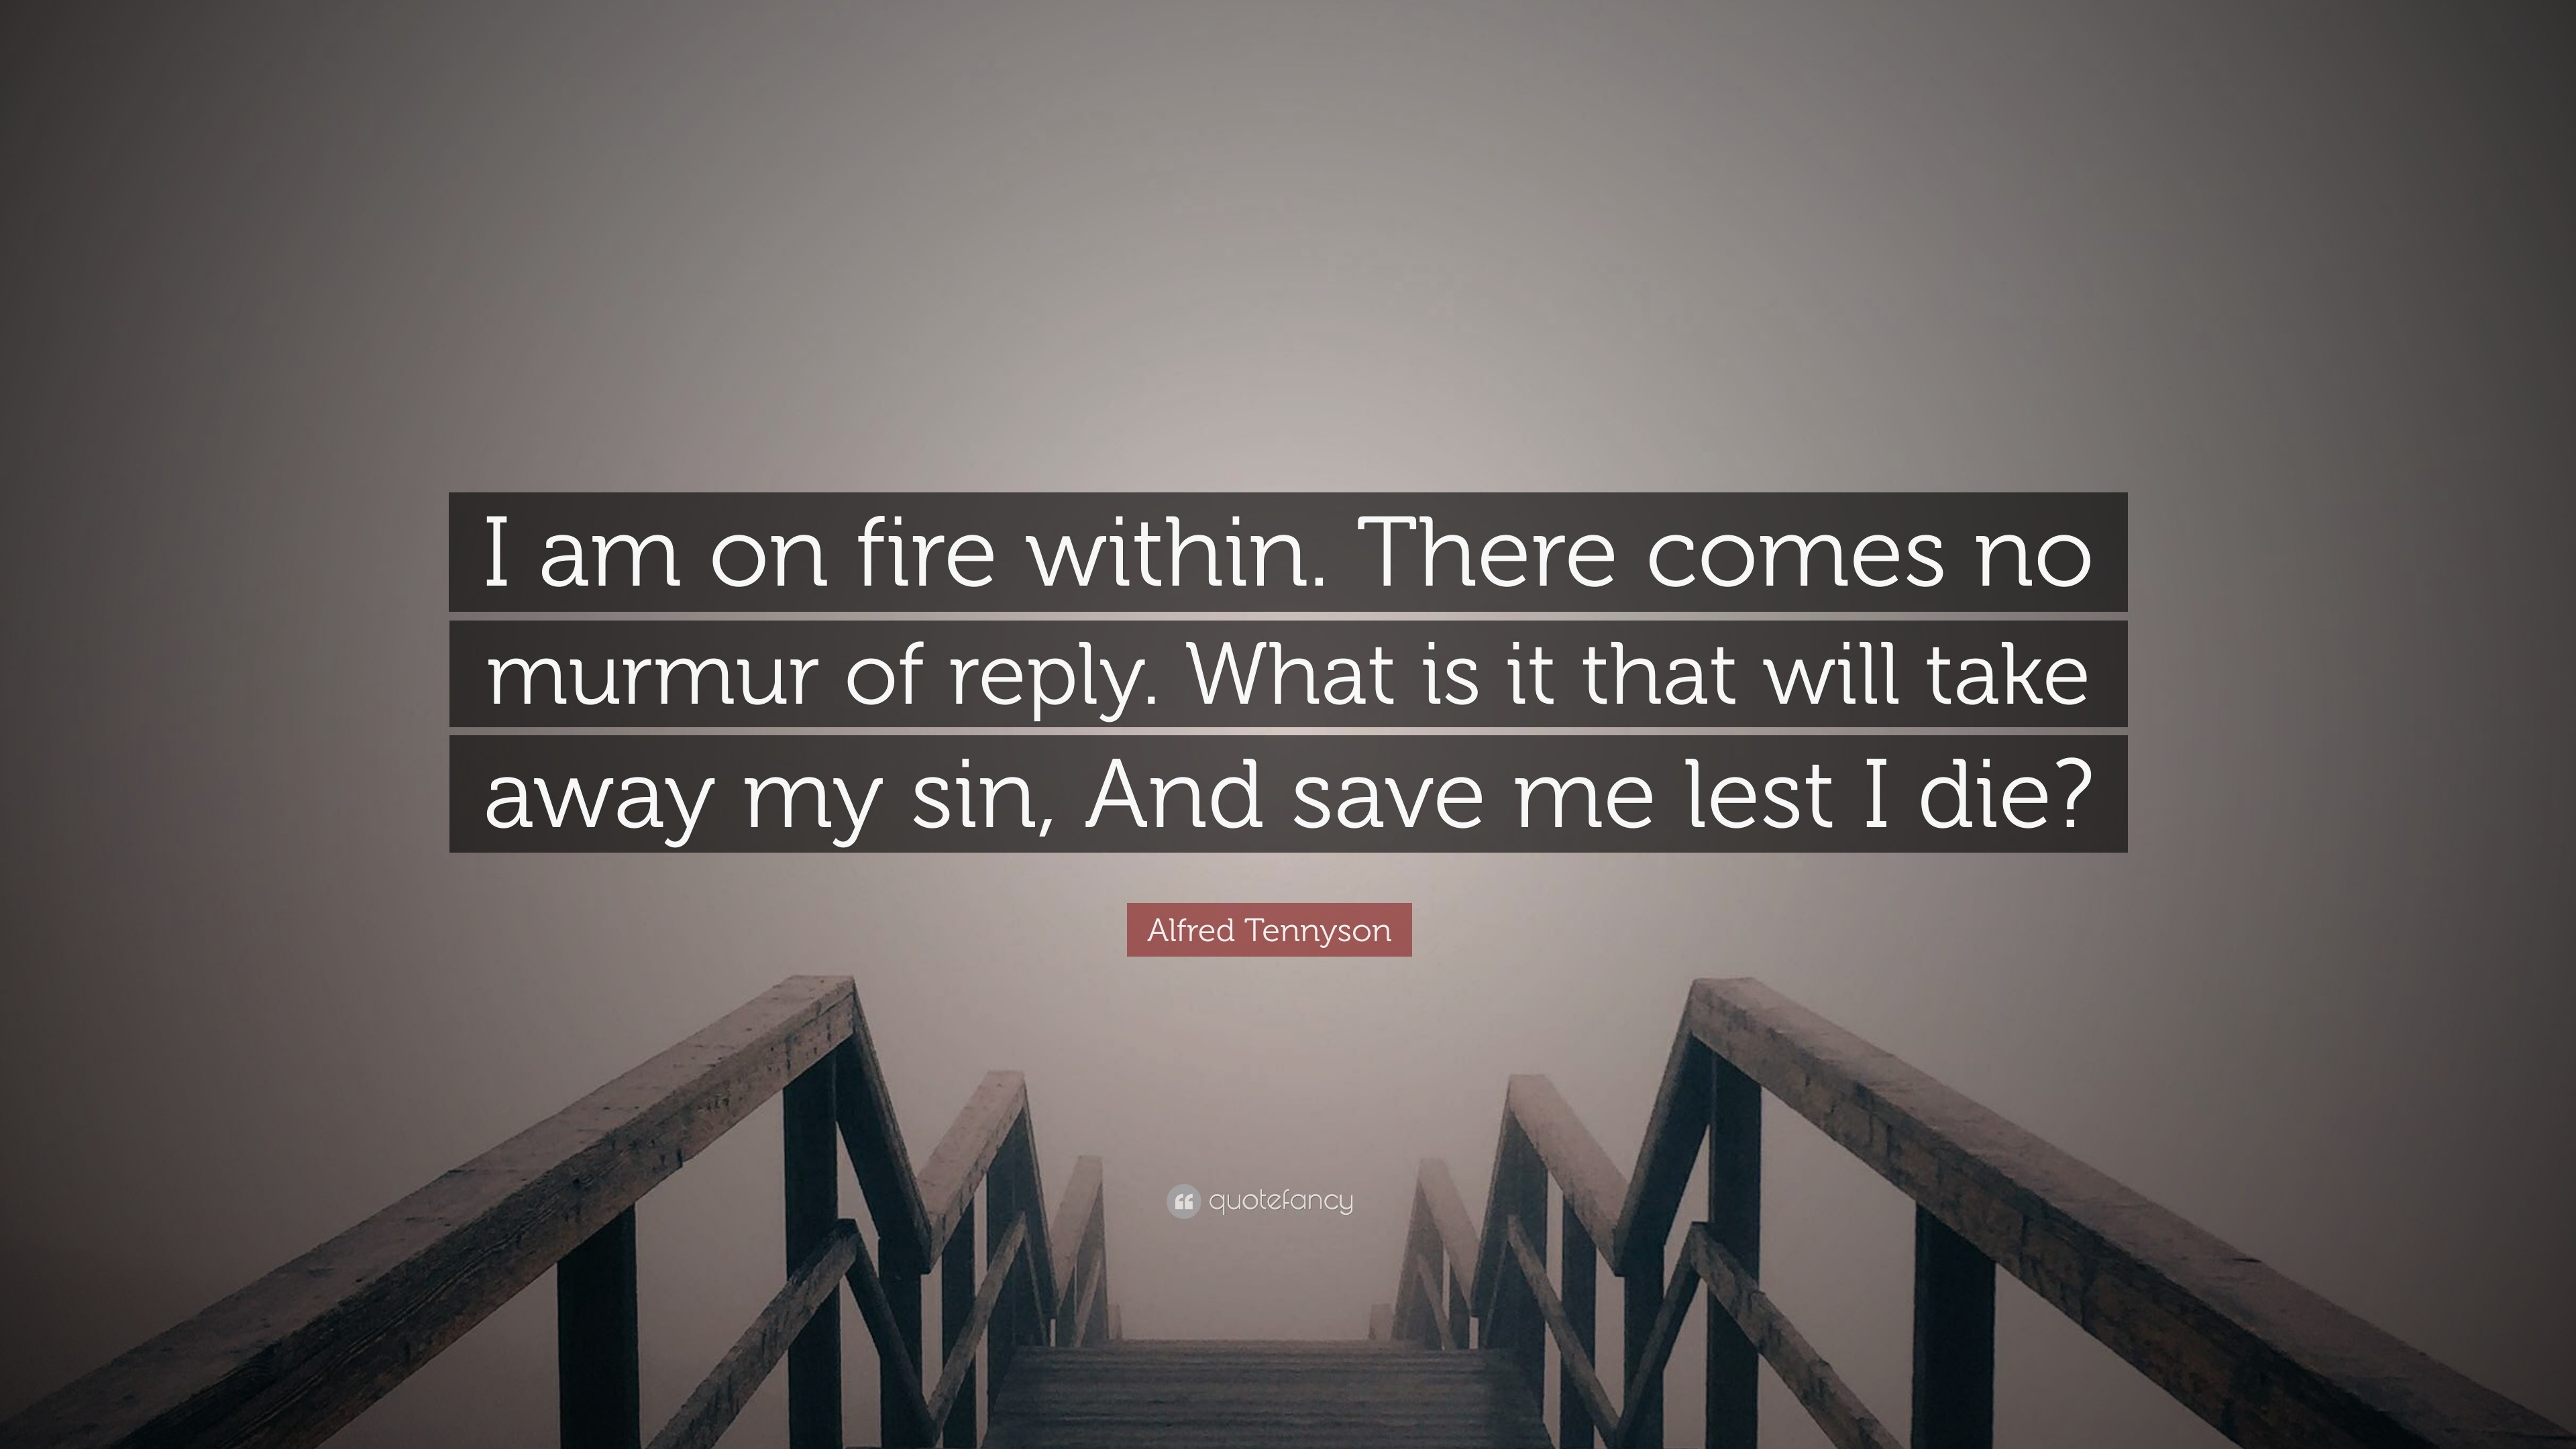 Alfred Tennyson Quote: “I am on fire within. There comes no murmur of  reply. What is